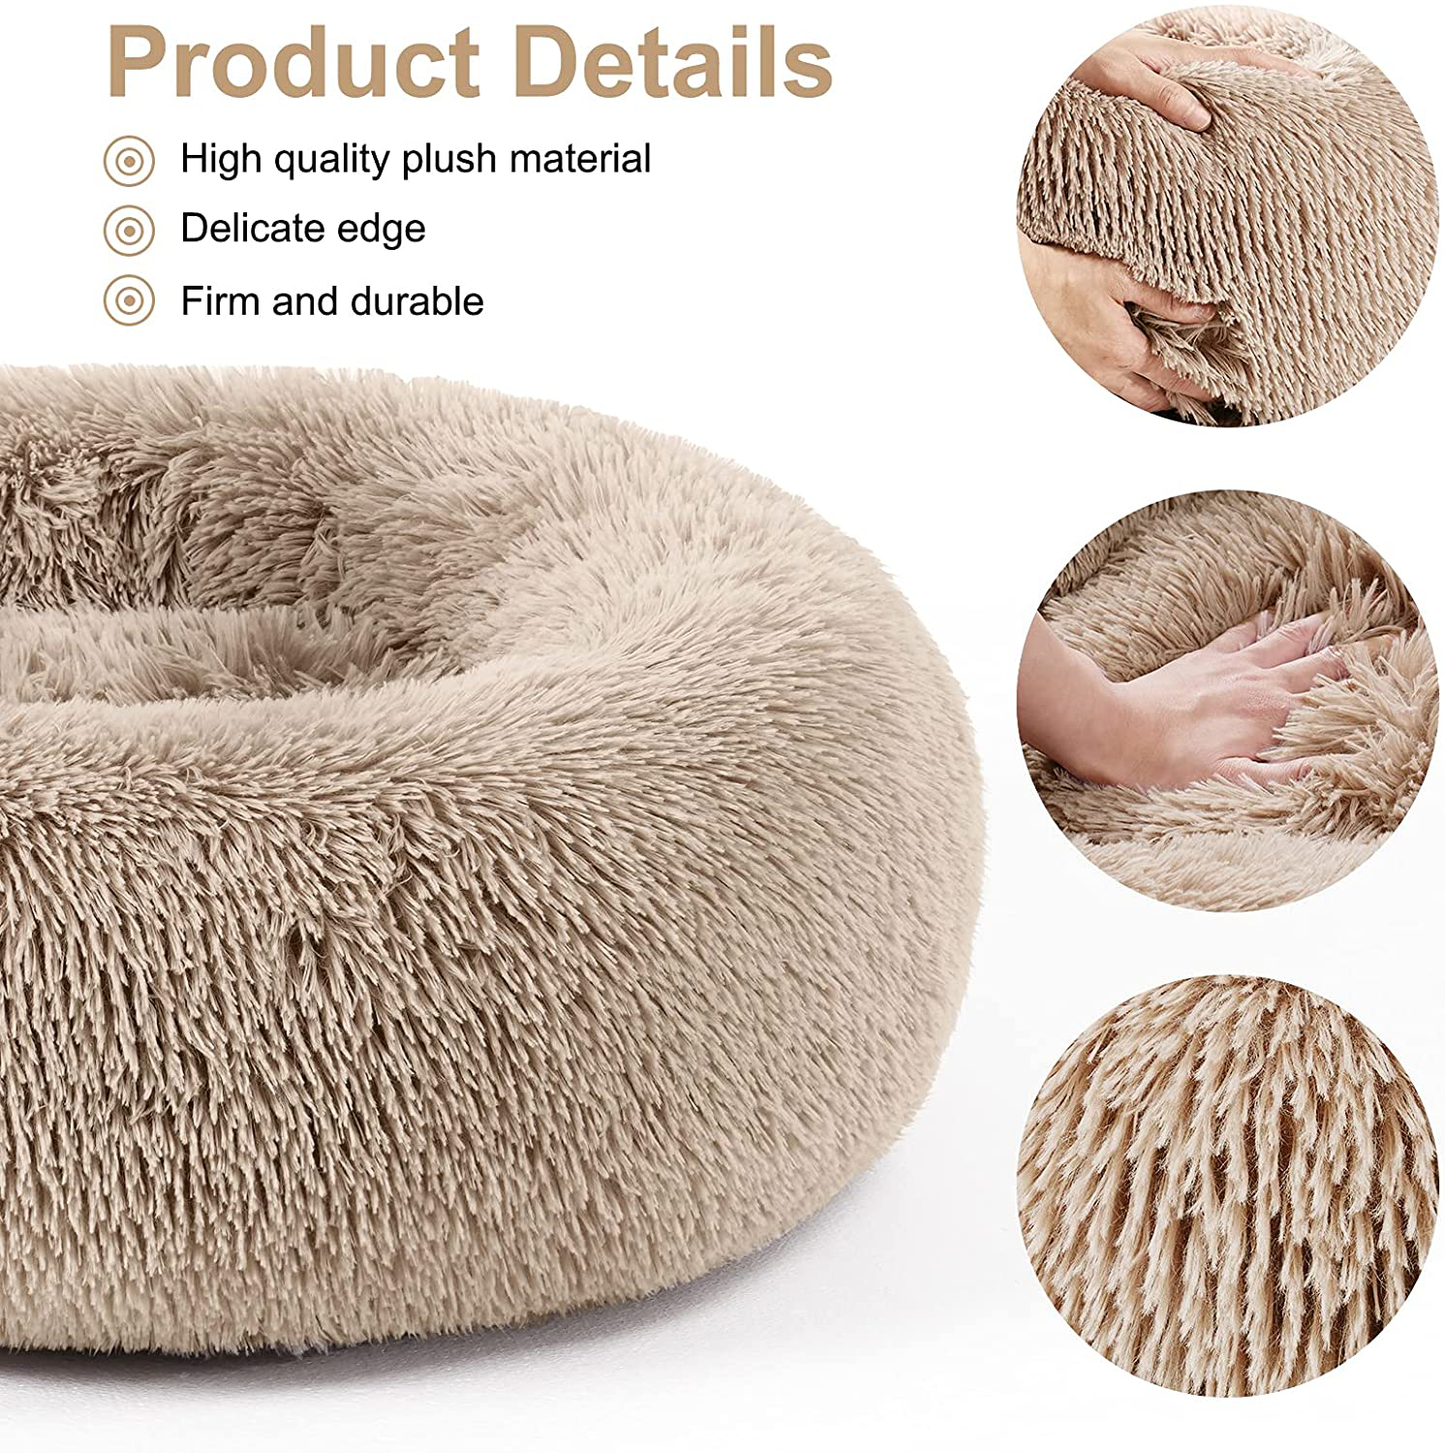 EASELAND Pet Dog Bed for Small Medium Dogs Cats Donut, Comfortable round Plush Dog Beds Calming Fluffy Faux Fur Cat Dog Cushion Bed, Machine Washable, Anti-Skid (23"/30") Animals & Pet Supplies > Pet Supplies > Dog Supplies > Dog Beds EASELAND   